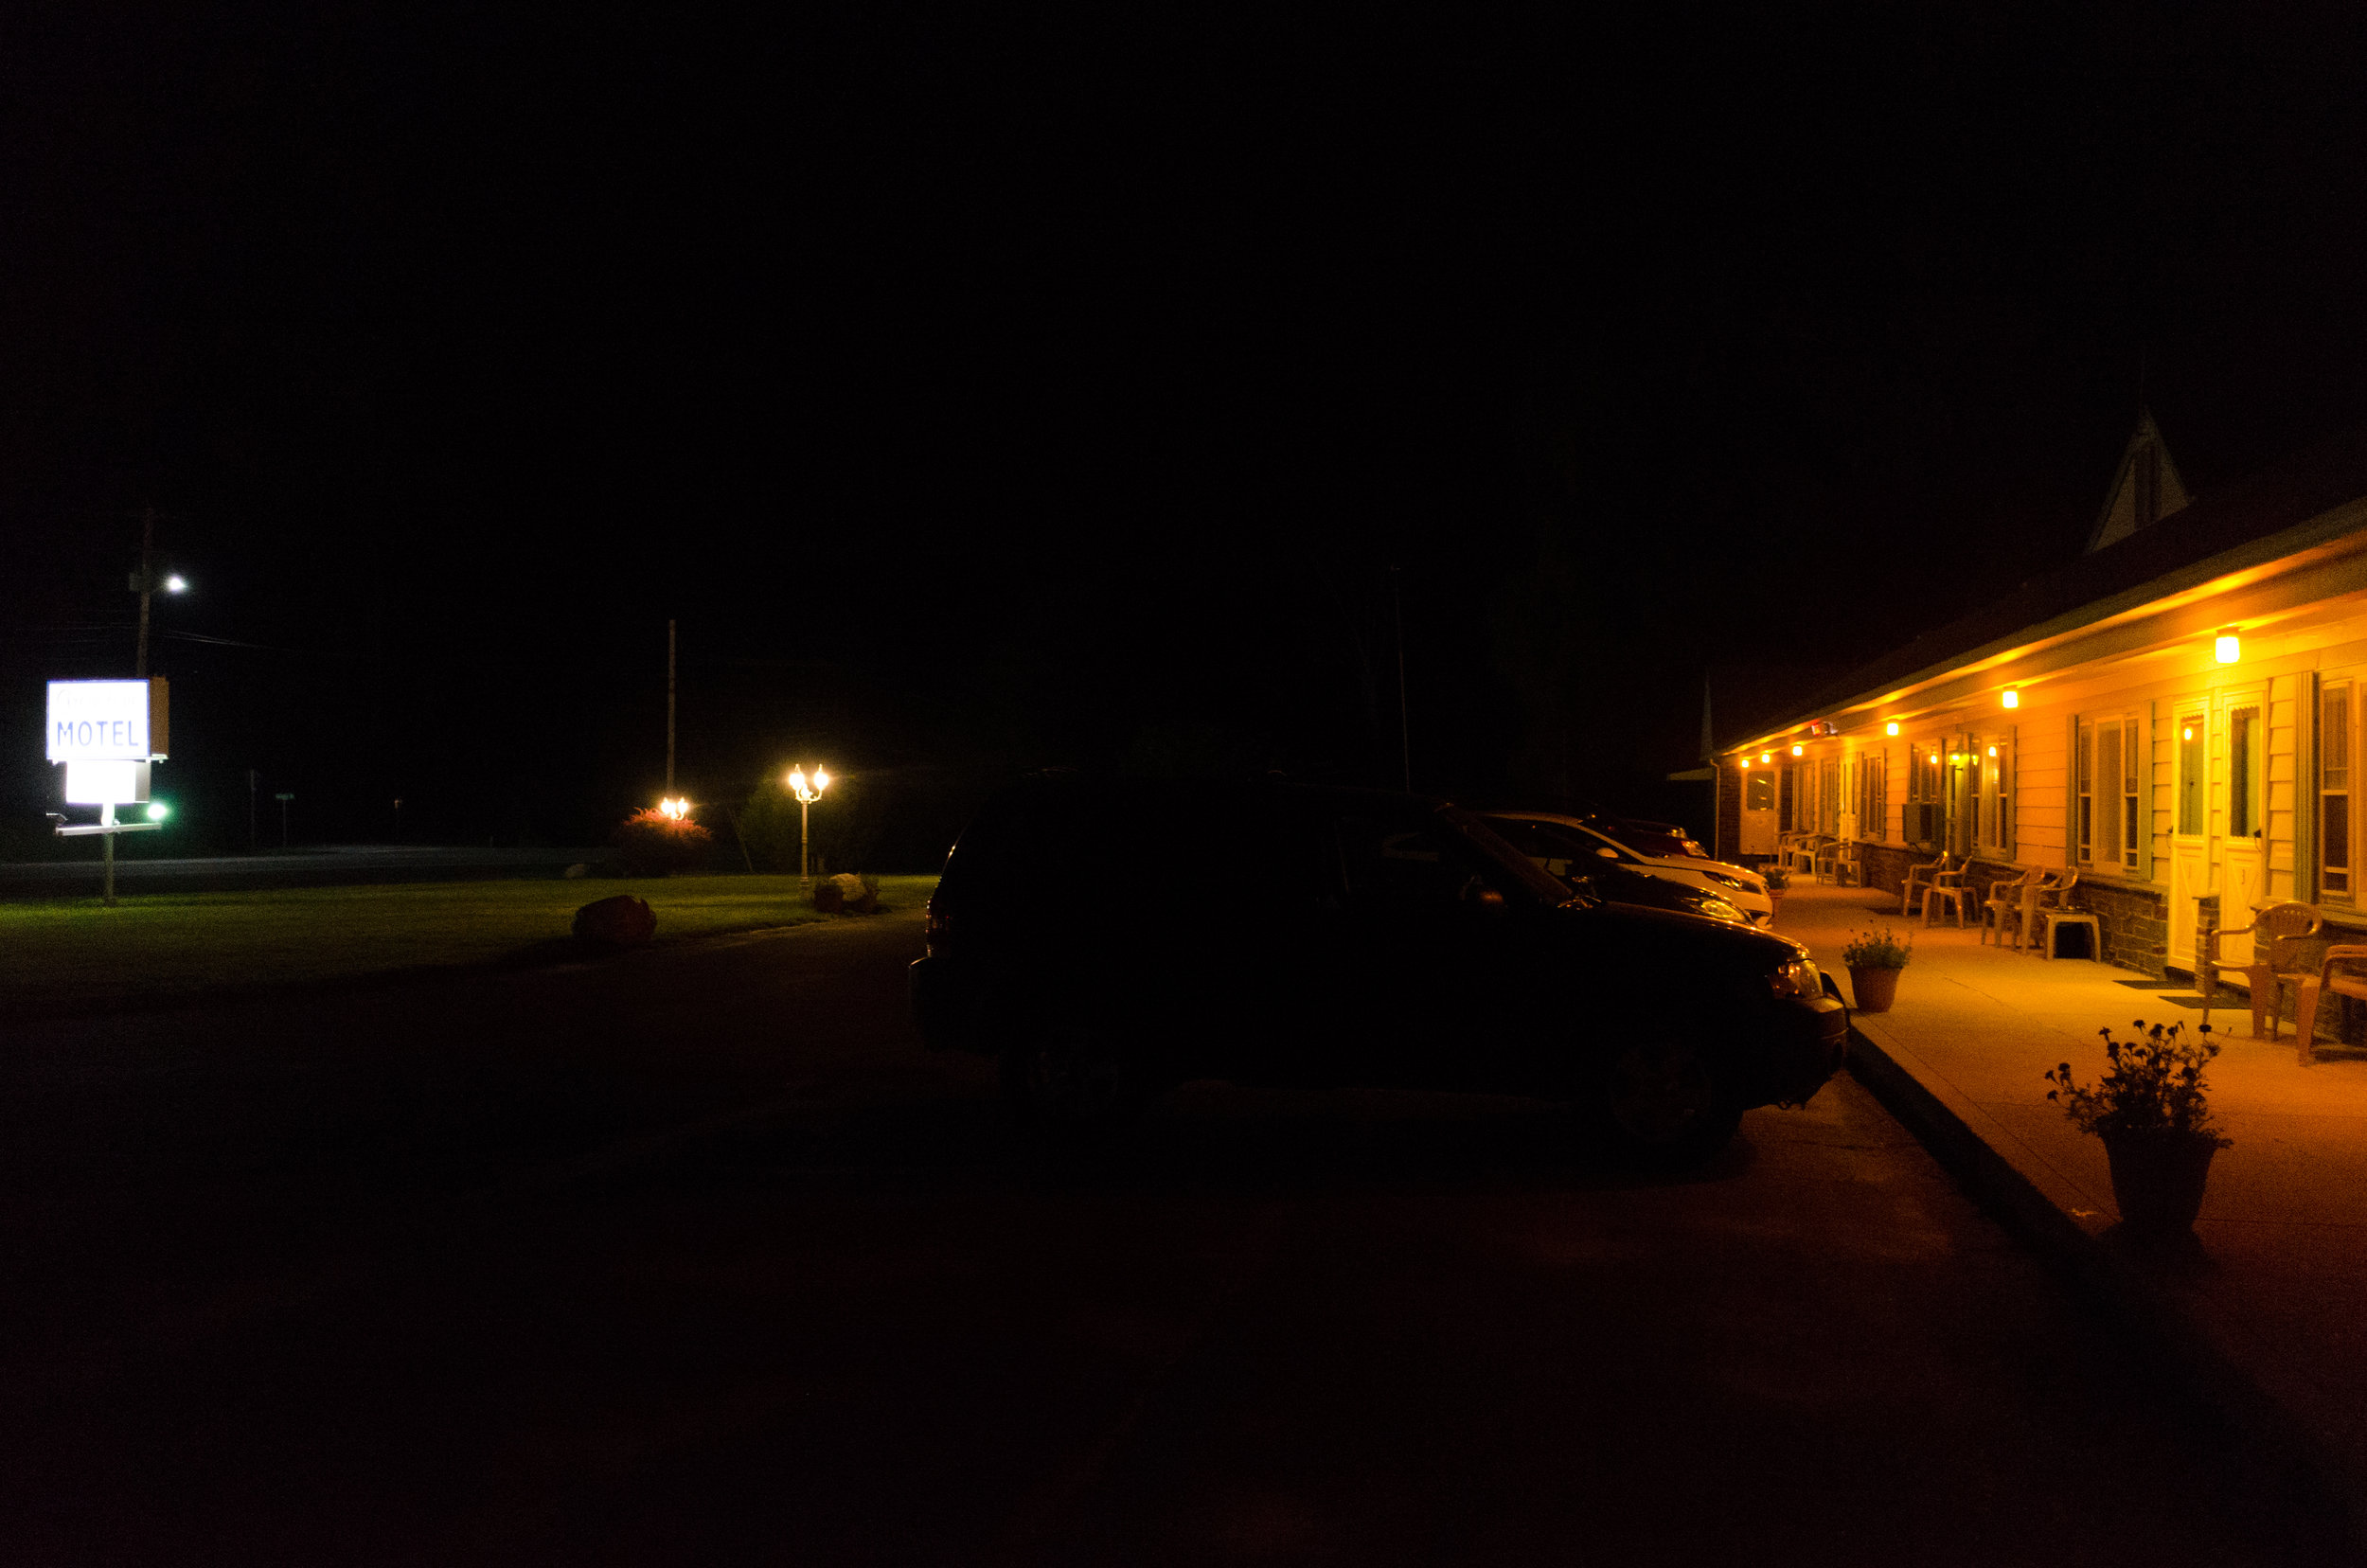   It started fortuitously - after a long five hour drive from Brooklyn to Middlebury Vermont with my friend Jeff Sereni we pulled into a dark motel parking lot at the same moment as our compatriot Simon Fong who had completed a similarly long drive S